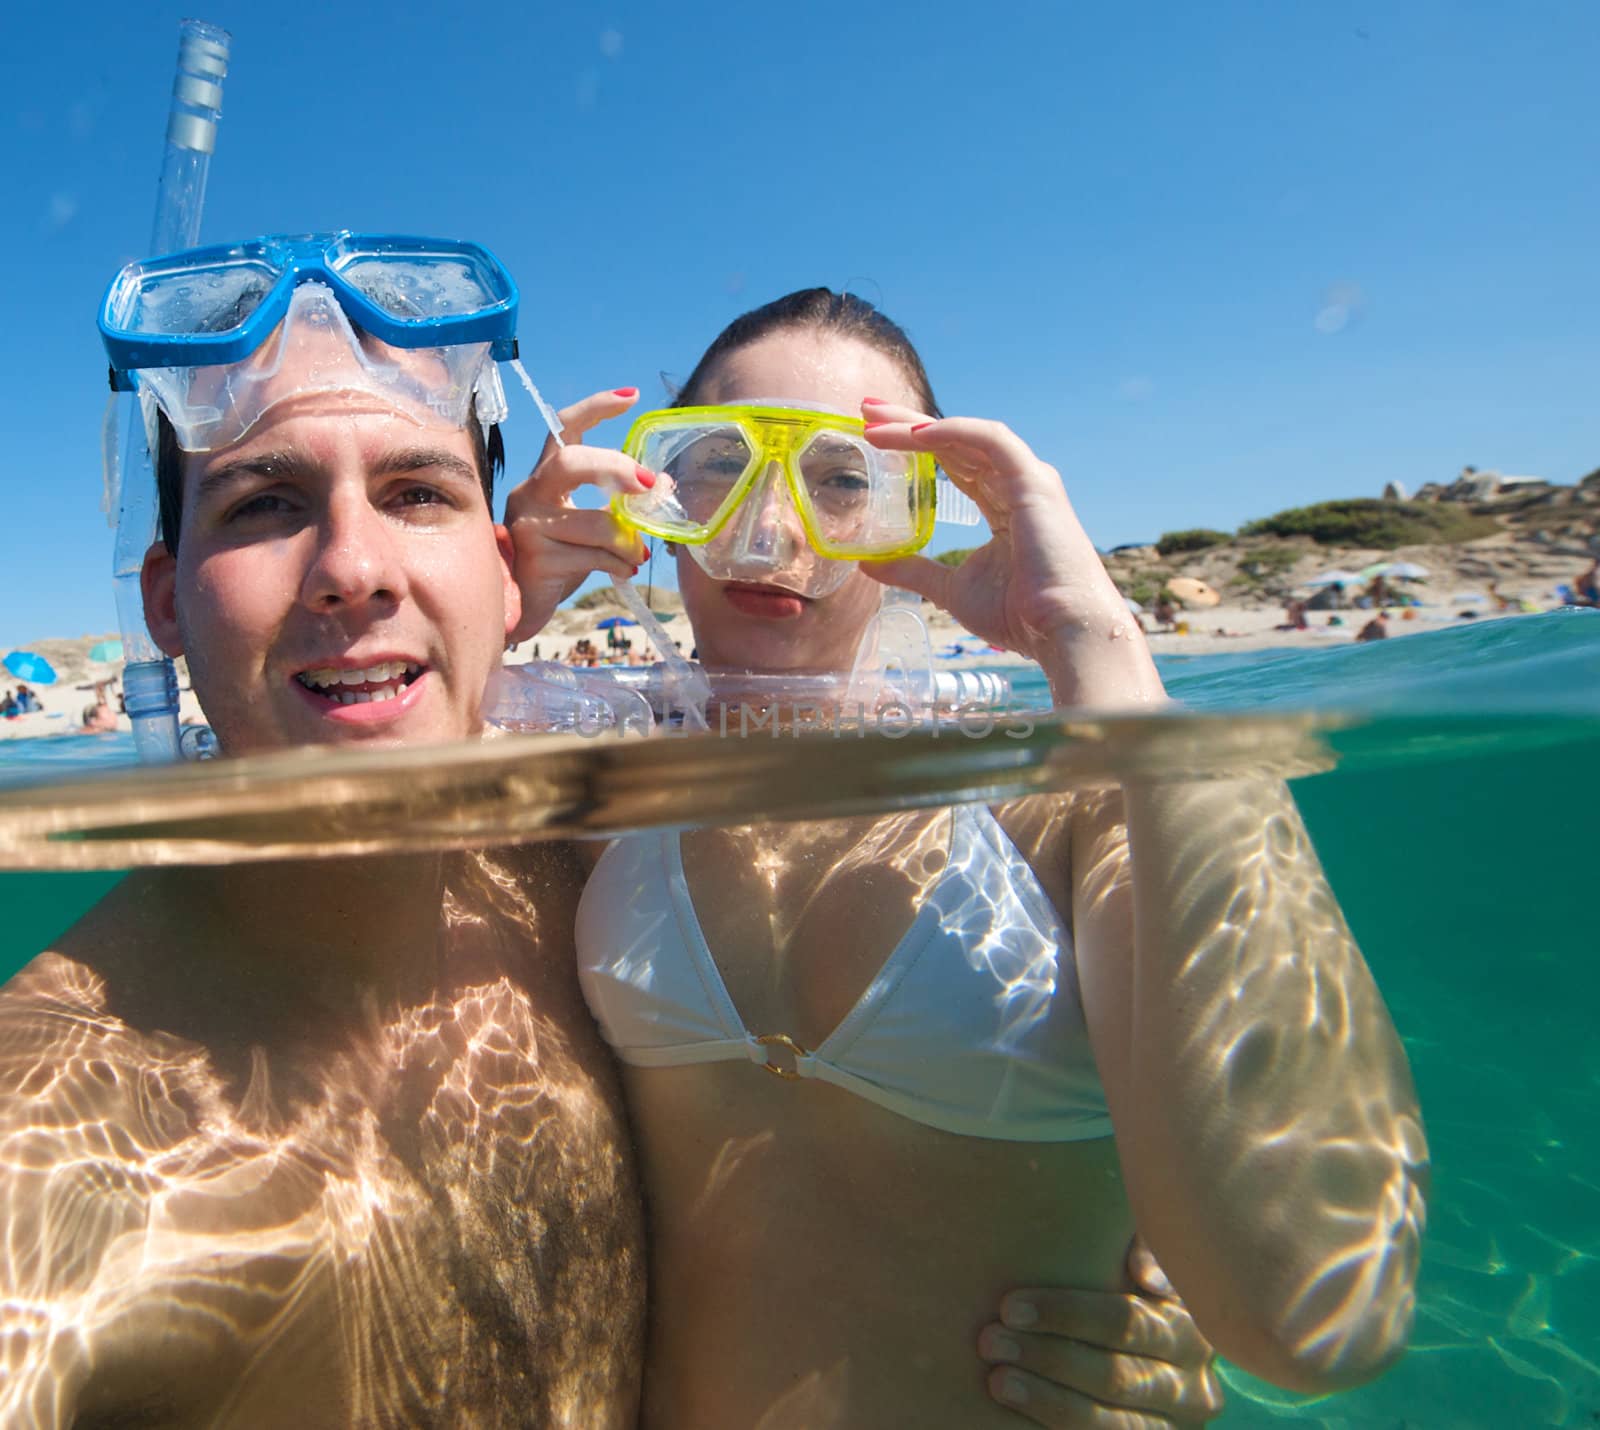 Lovely couple enjoying snorkeling during their vacation